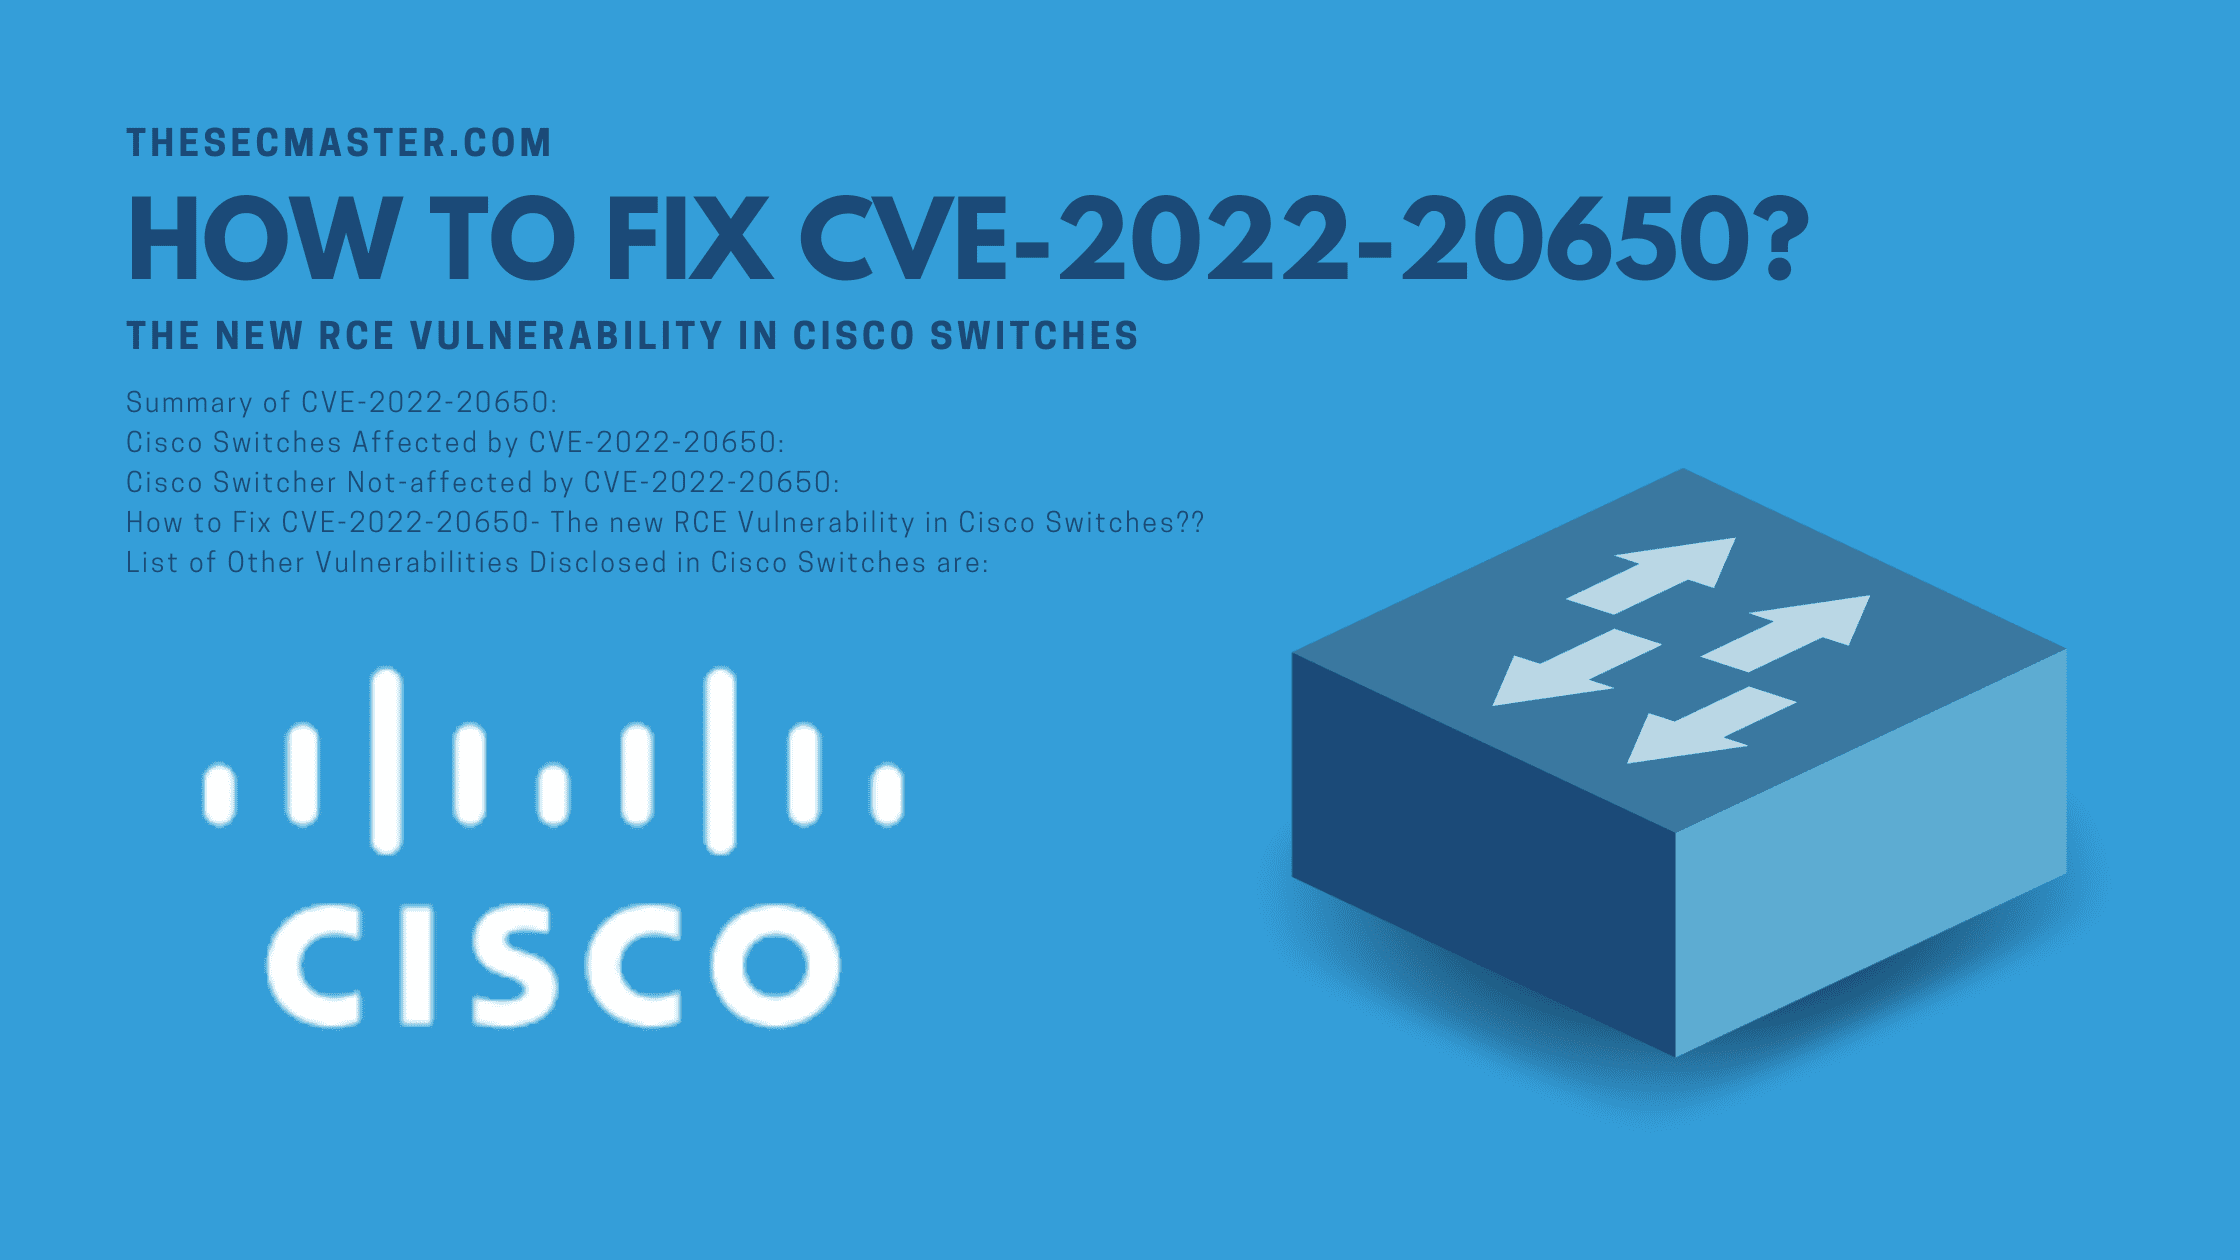 How To Fix Cve 2022 20650 The New Rce Vulnerability In Cisco Switches